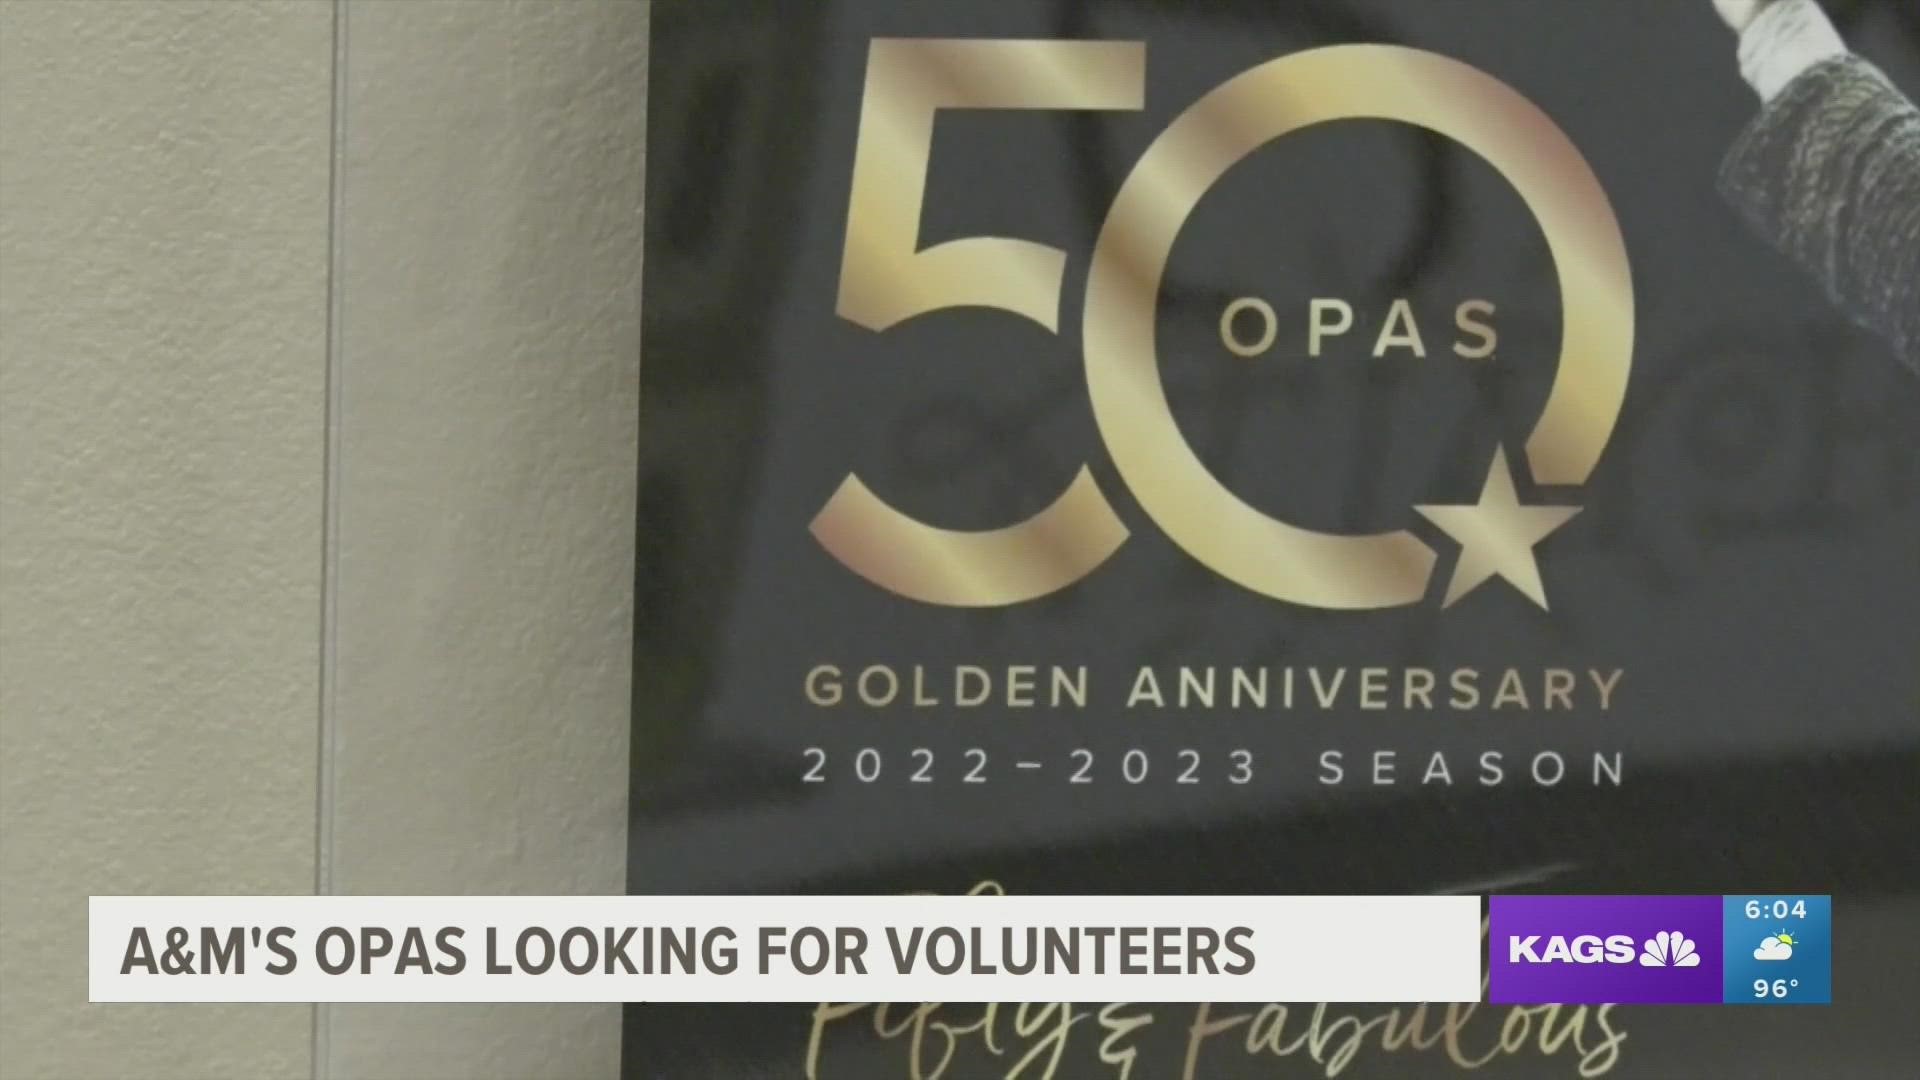 Kayla Shepherd, the Events and Operations Coordinator for Texas A&M OPAS, said they're looking to have roughly 70 volunteers for their fall lineup of touring shows.